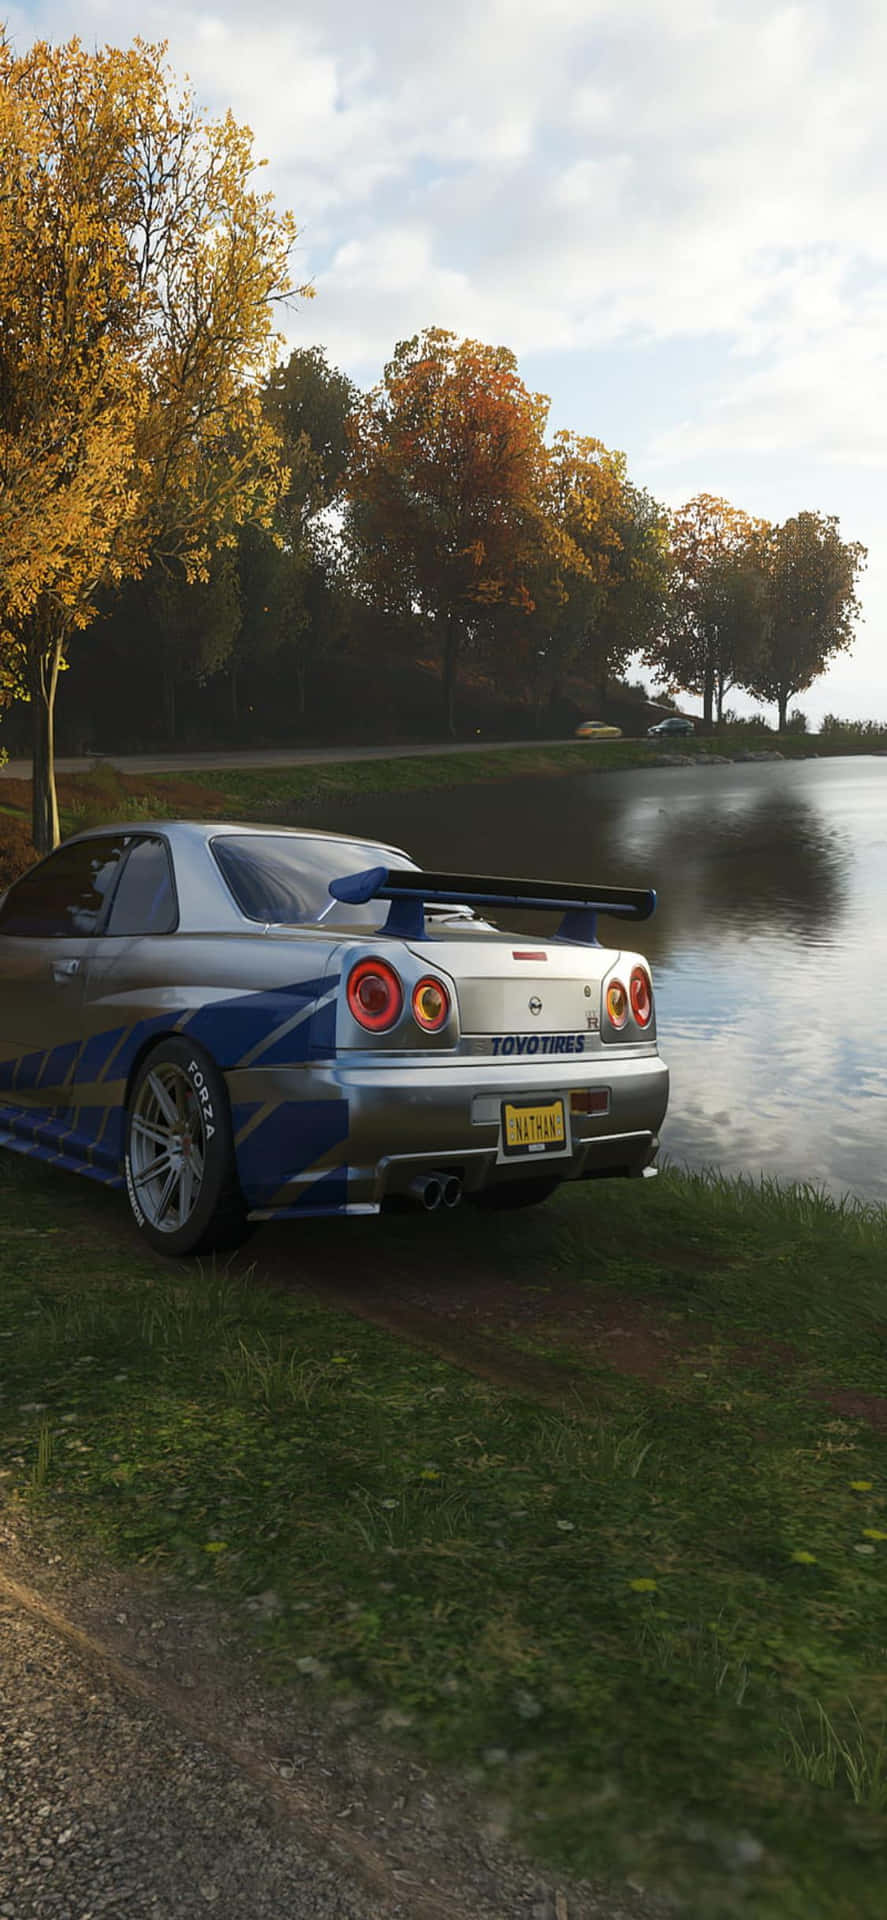 Play Forza Horizon 4 on an Iphone Xs